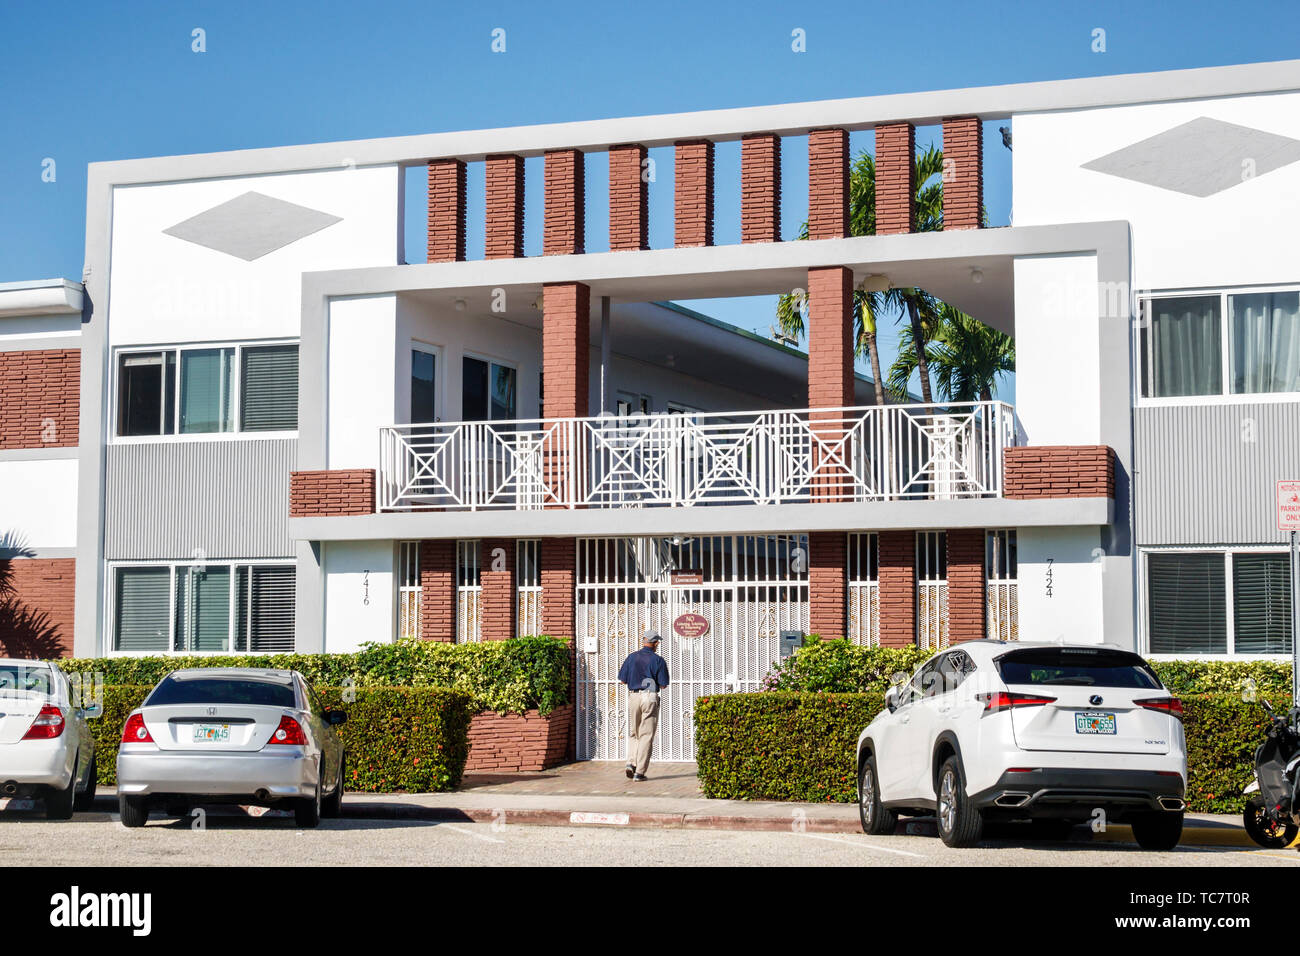 Miami Beach Florida,North Beach,North Shore National Register District,residence home,facade,exterior,MiMo Mid Century Post war style architecture,apa Stock Photo